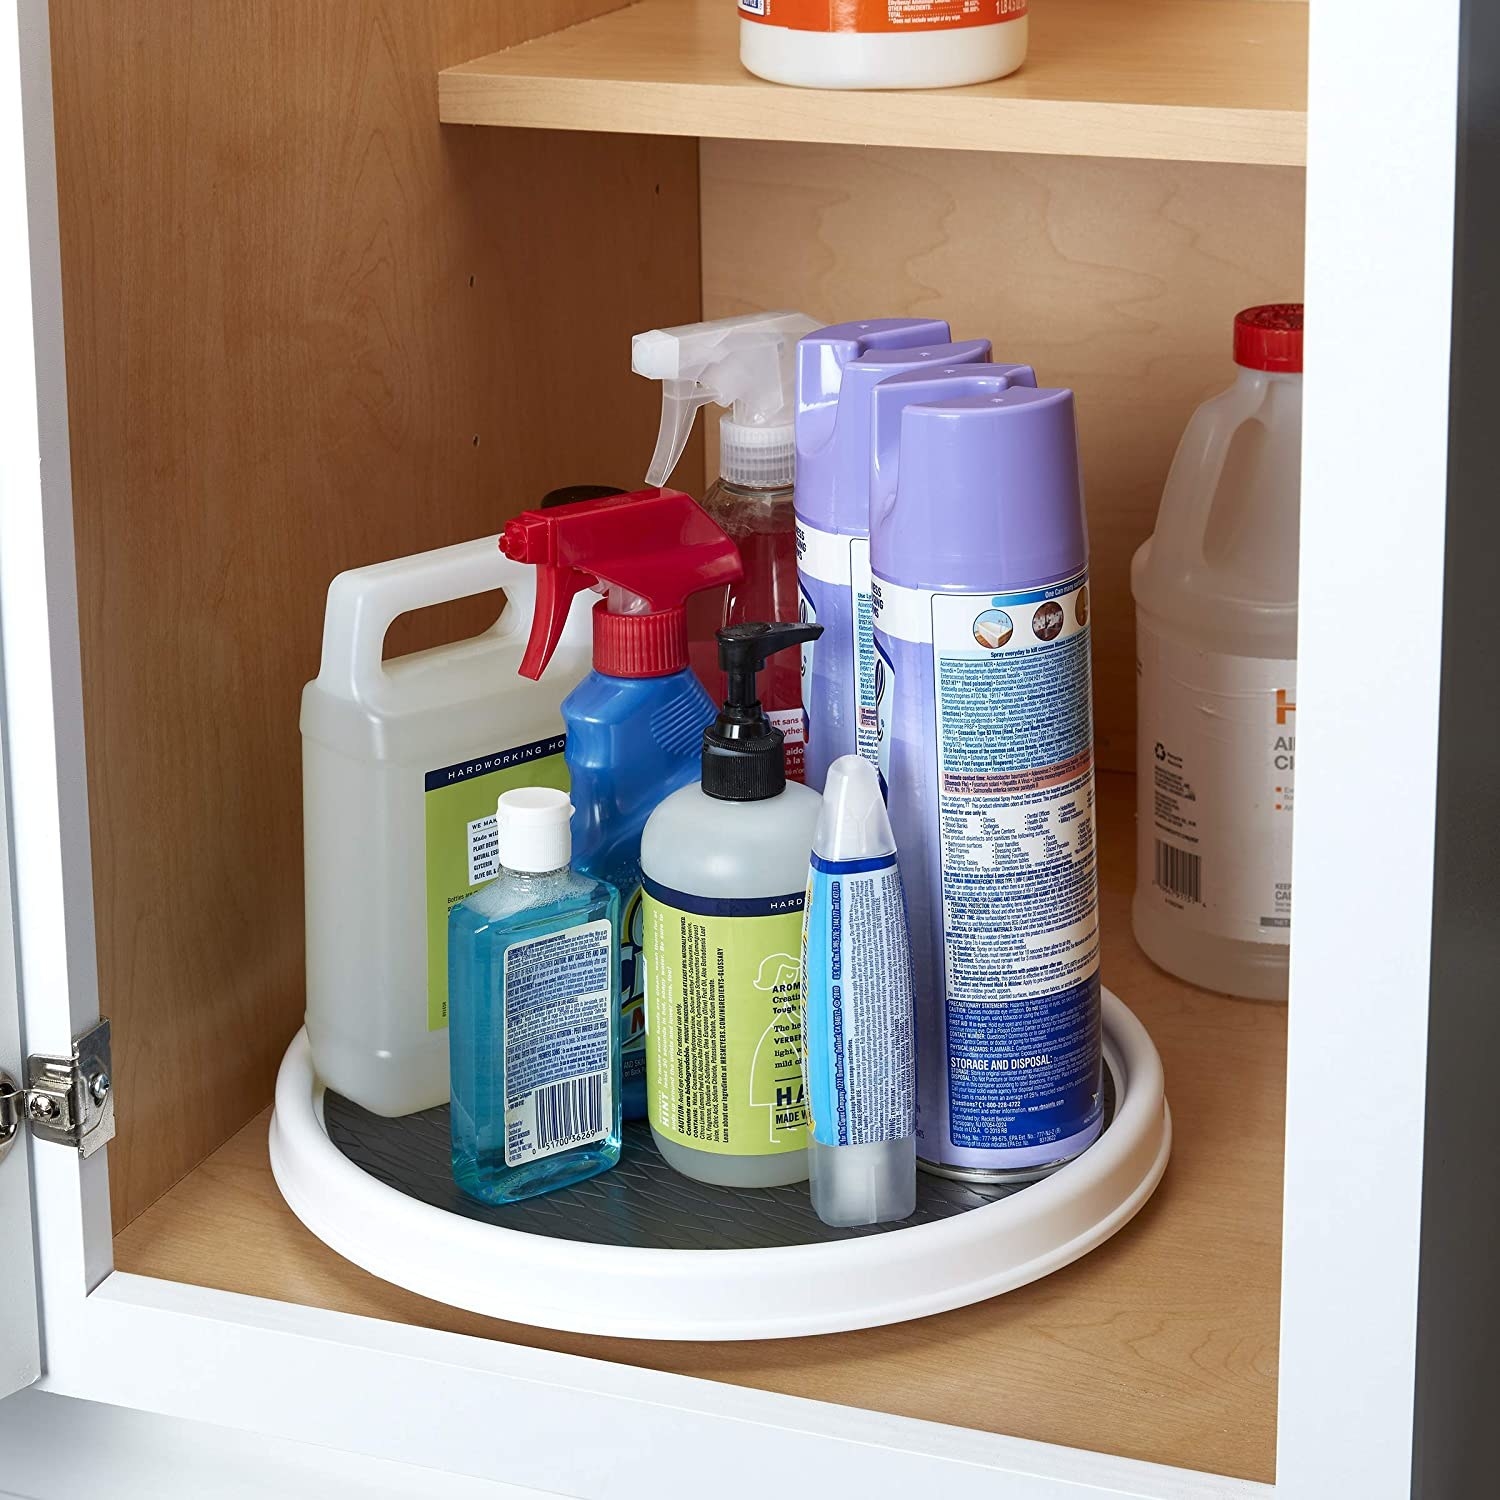 lazy susan with cleaning products on it